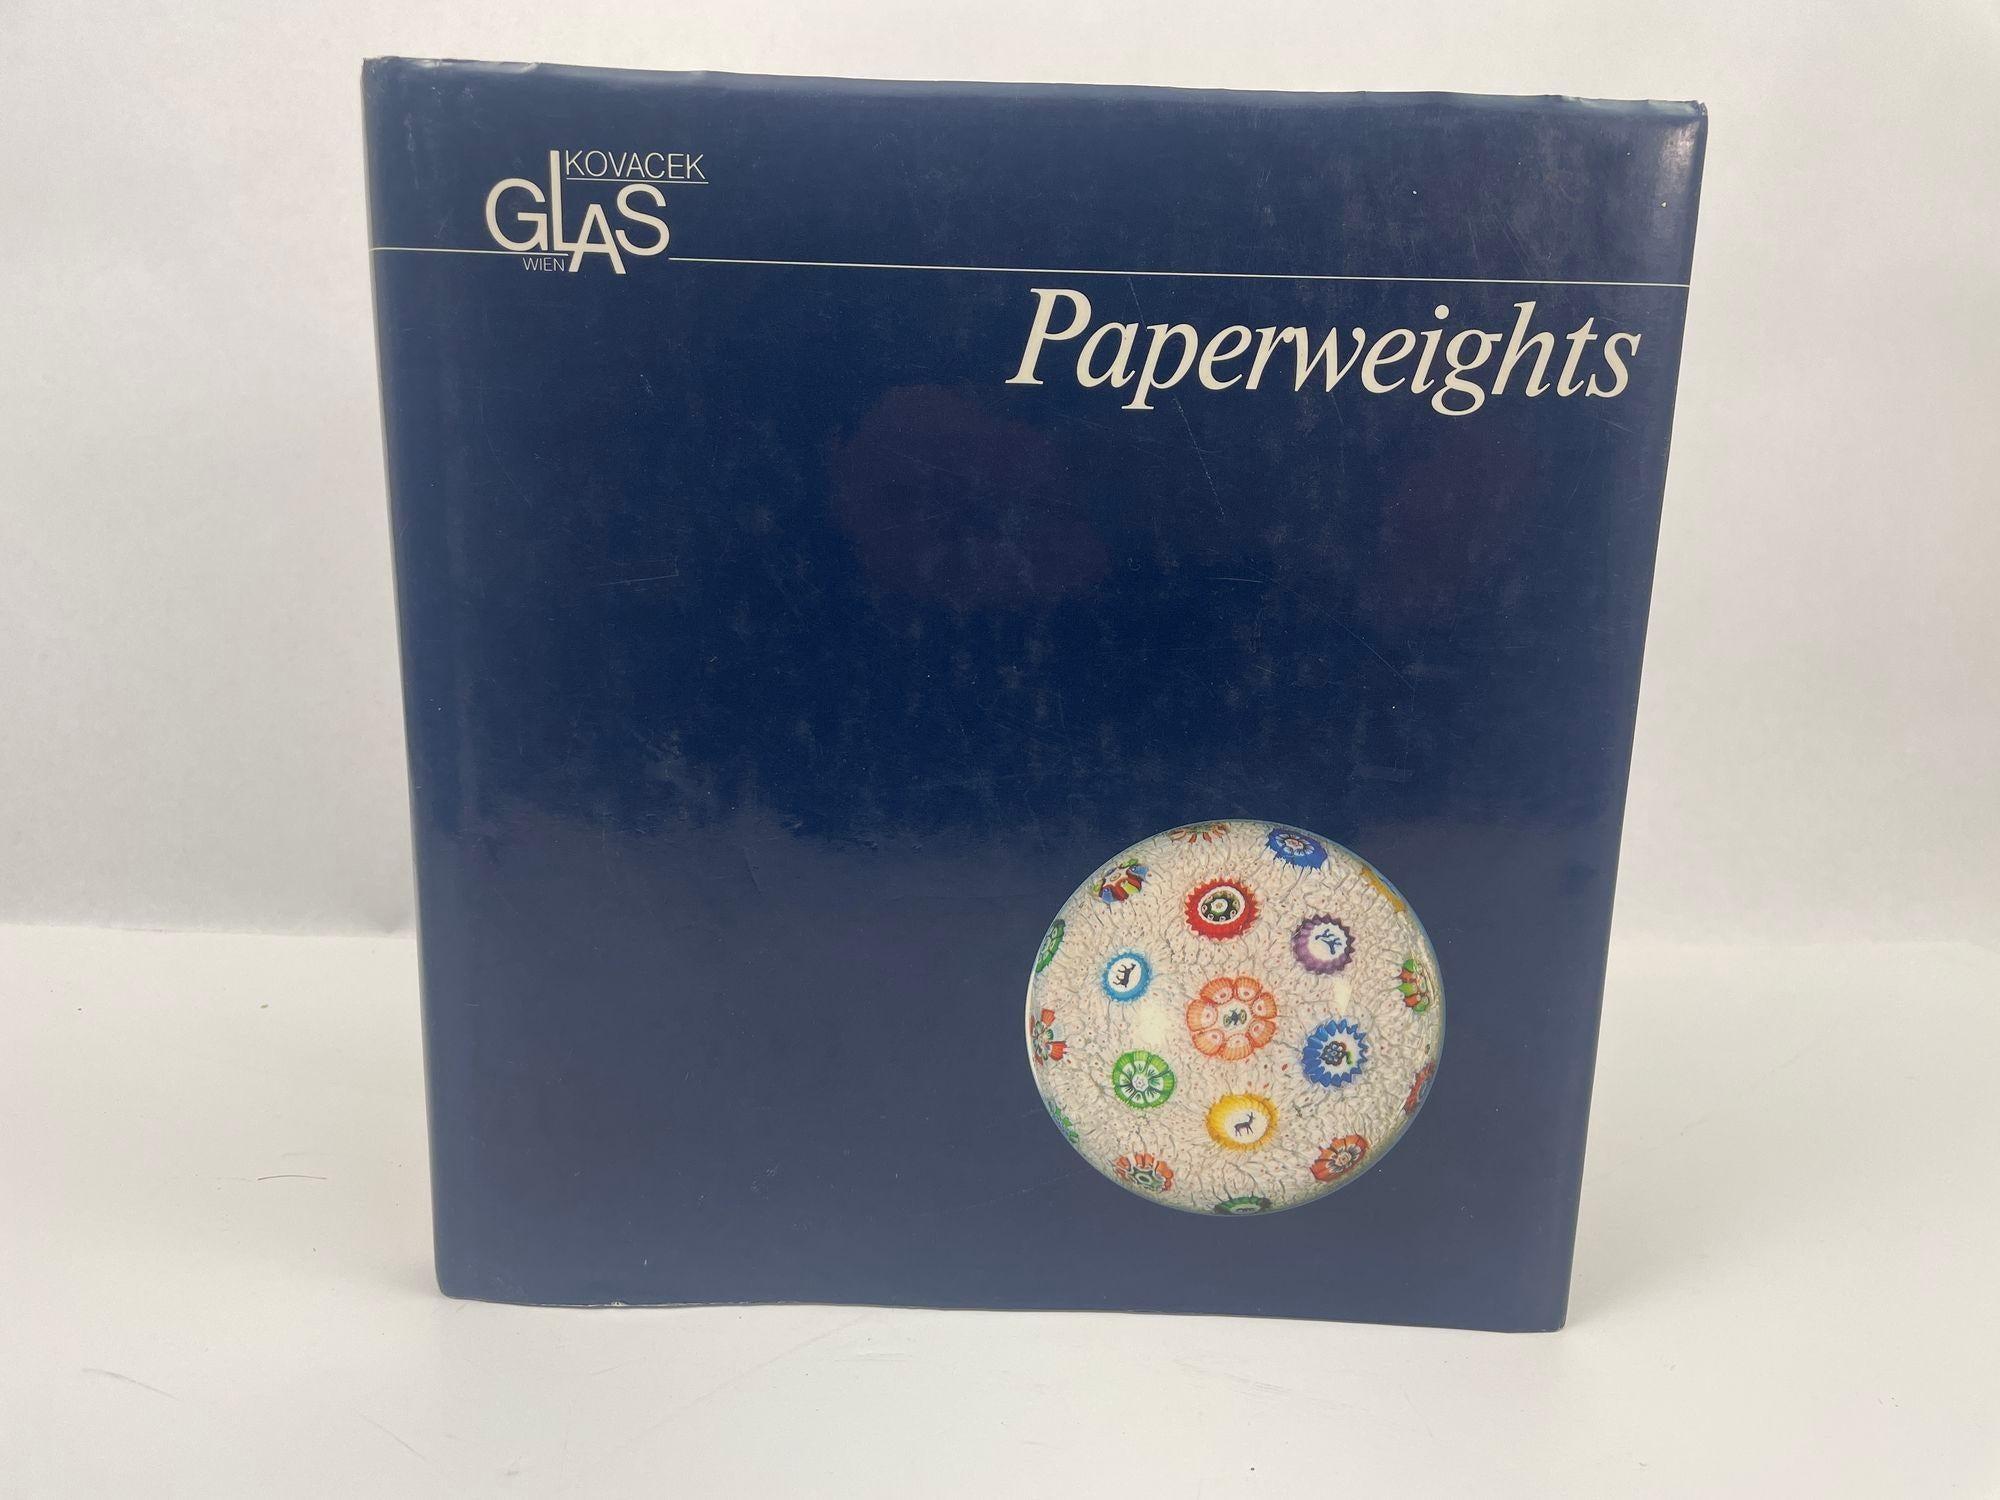 Paperweights Glass Gallery Michael Kovacek Vienna - 1987 Hardcover Reference Book.
A superb collection of 19th century and early 20th century glass paperweights with color images, and detailed written descriptions. 178 weights described, 168 pages